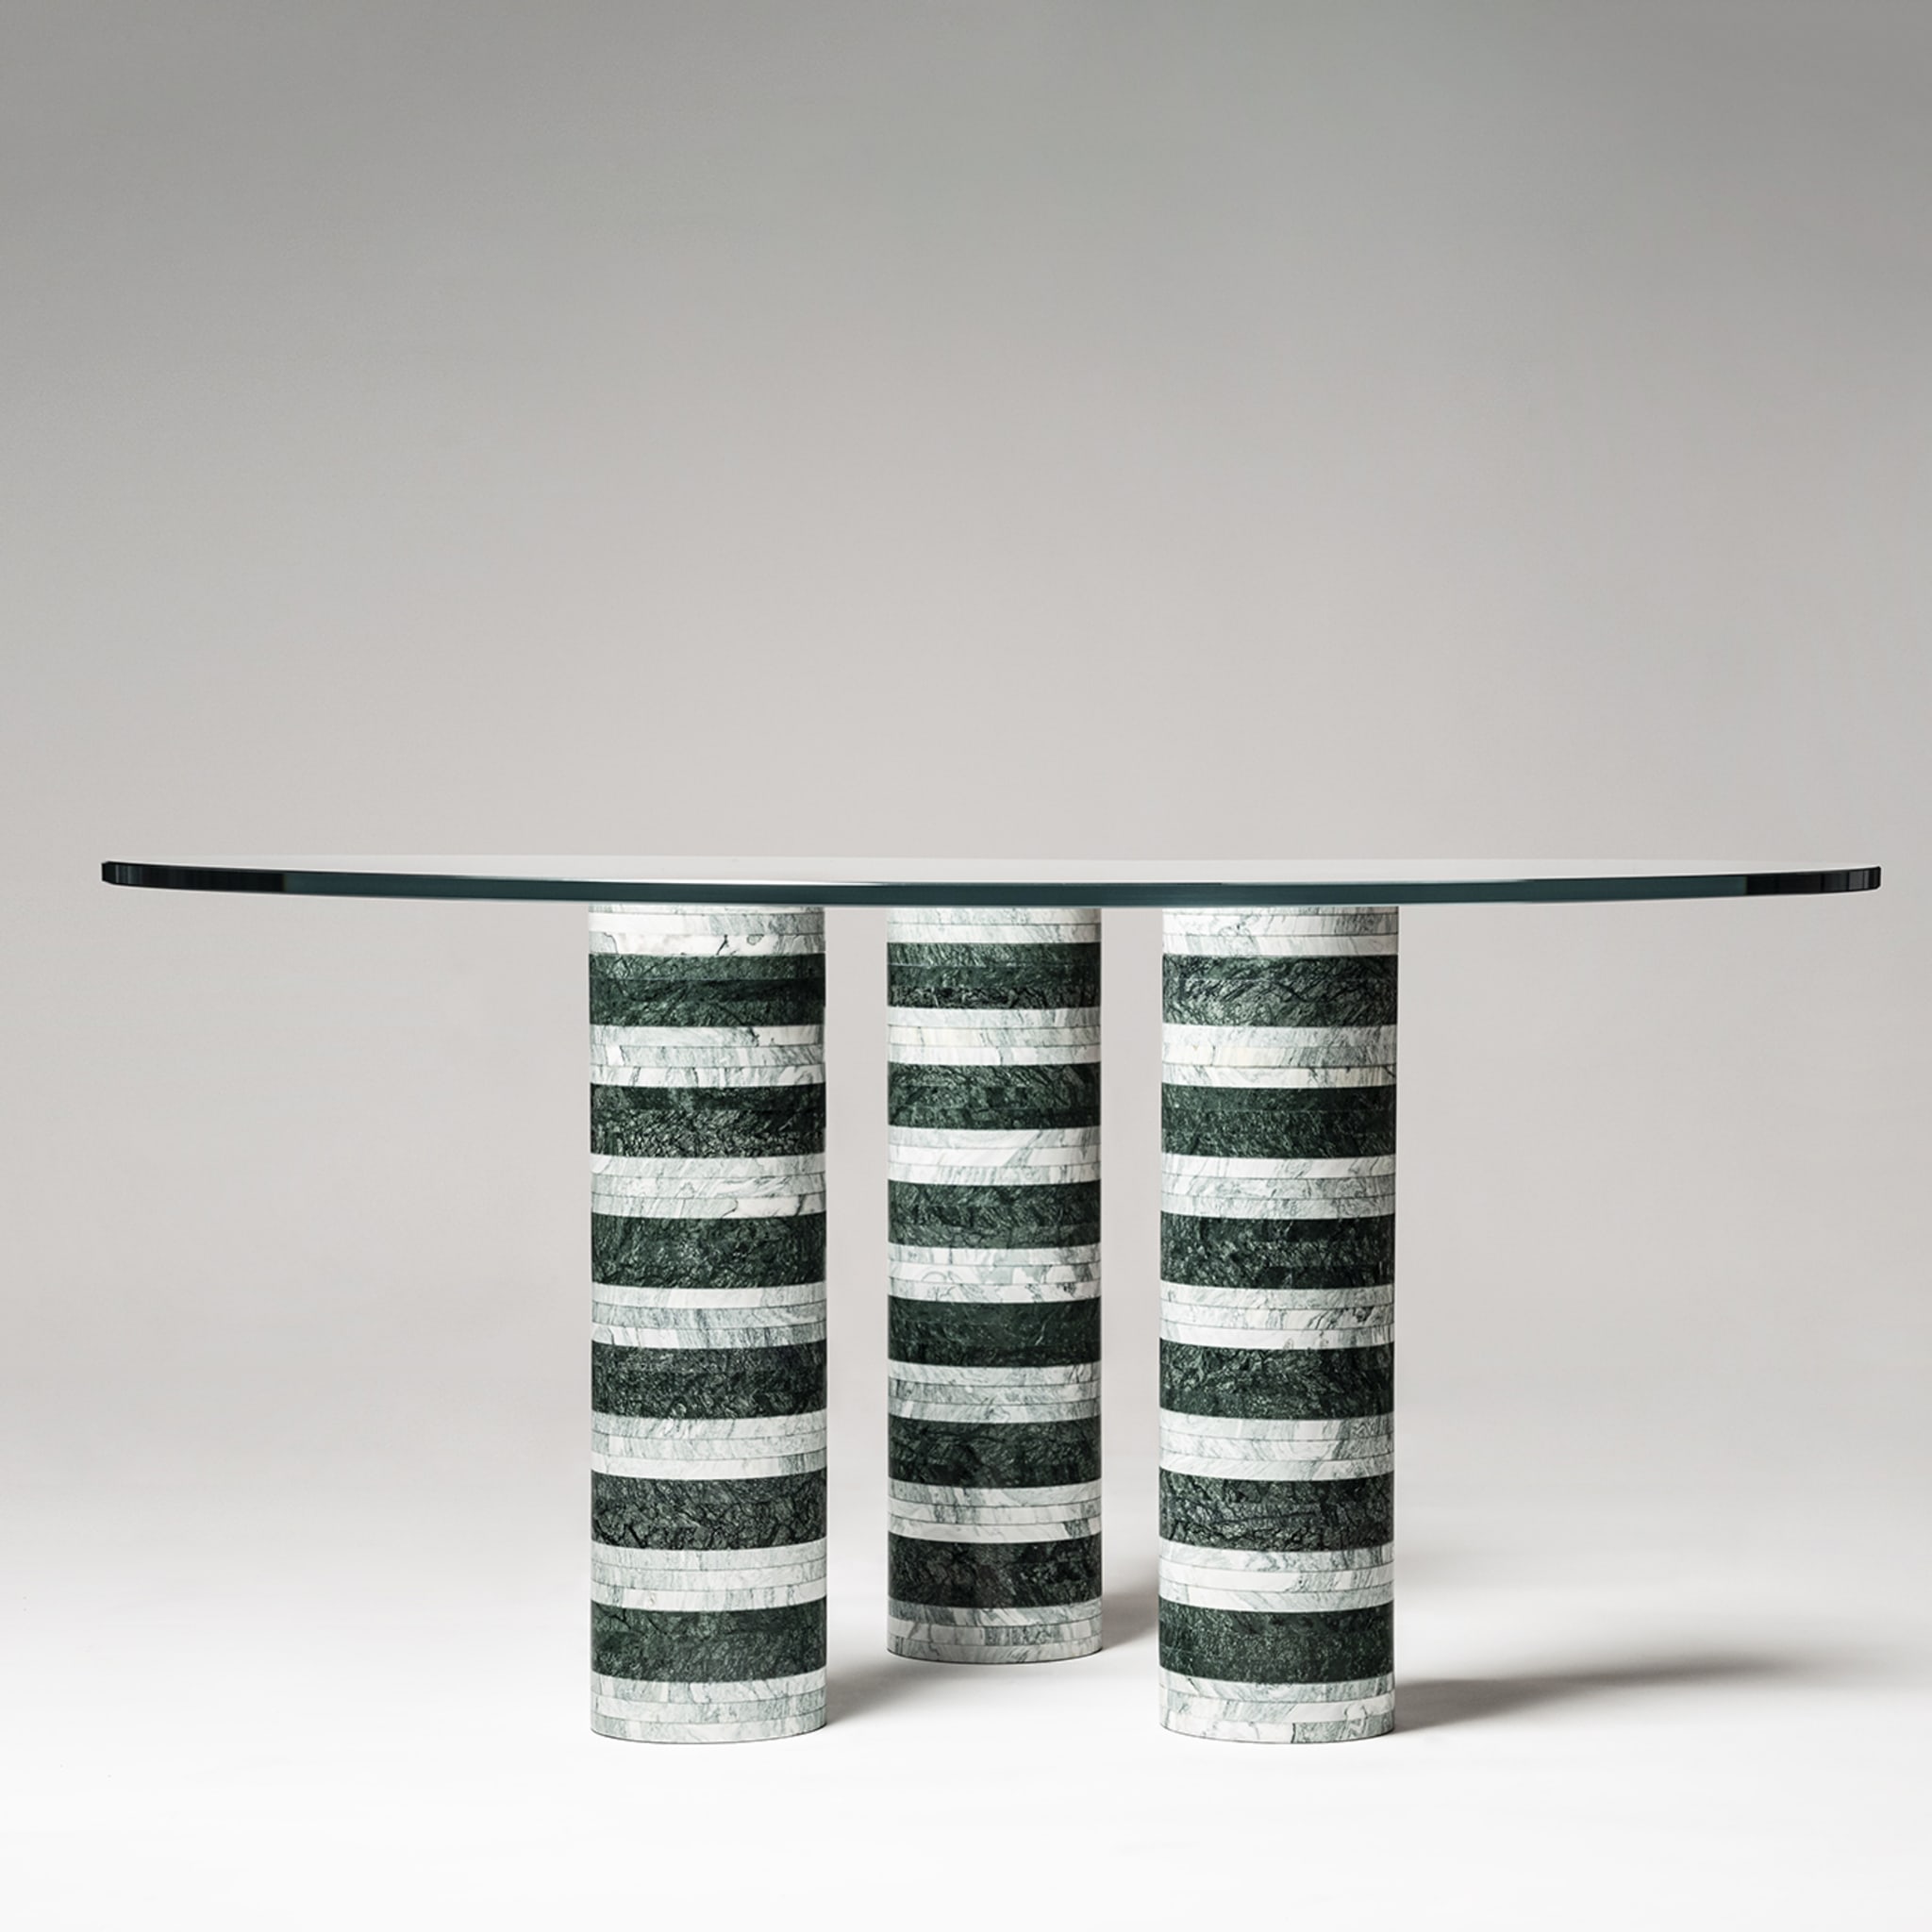 Architexture Living Table 03 by Patricia Urquiola - Alternative view 1